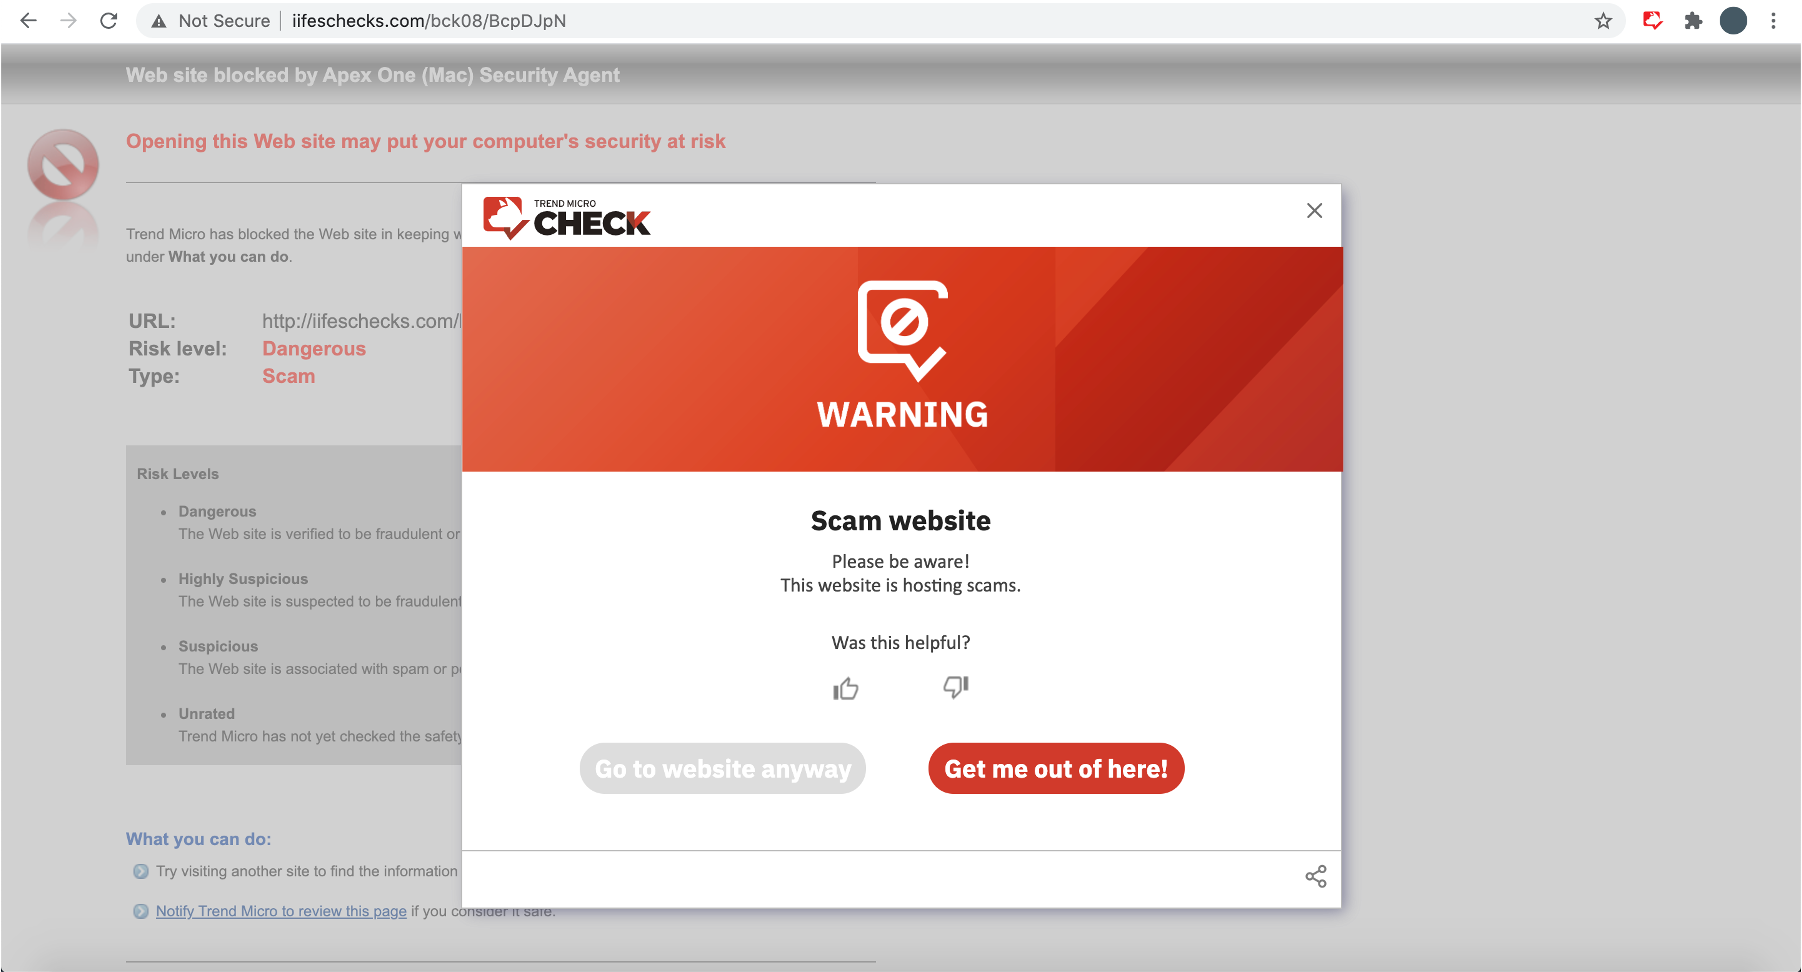 Trend Micro Check‘s Chrome extension can help you detect and block scam websites as well.
